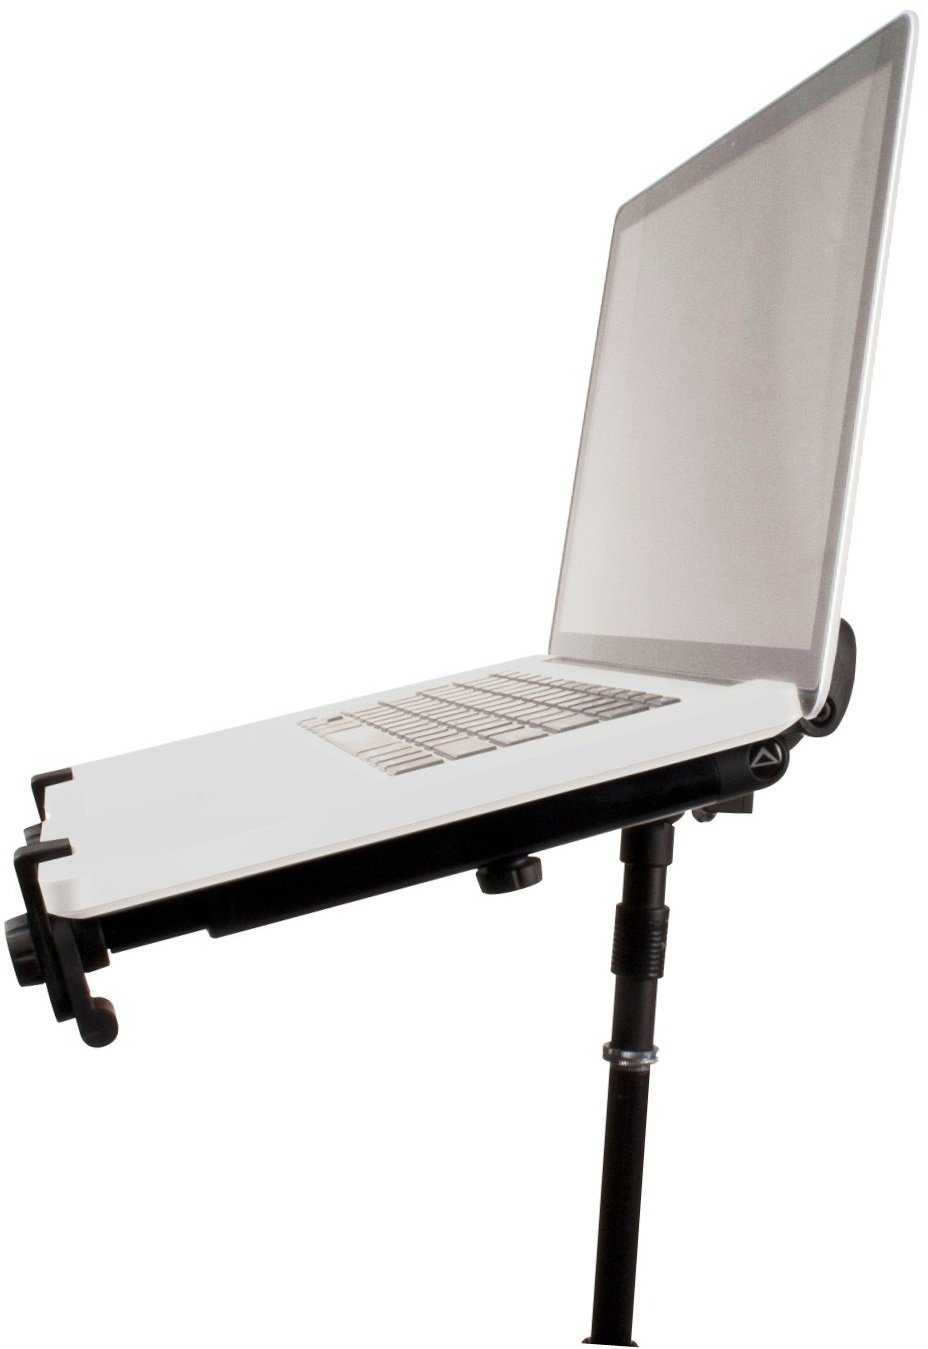 Keyboard stand accessories Ultimate UL905020